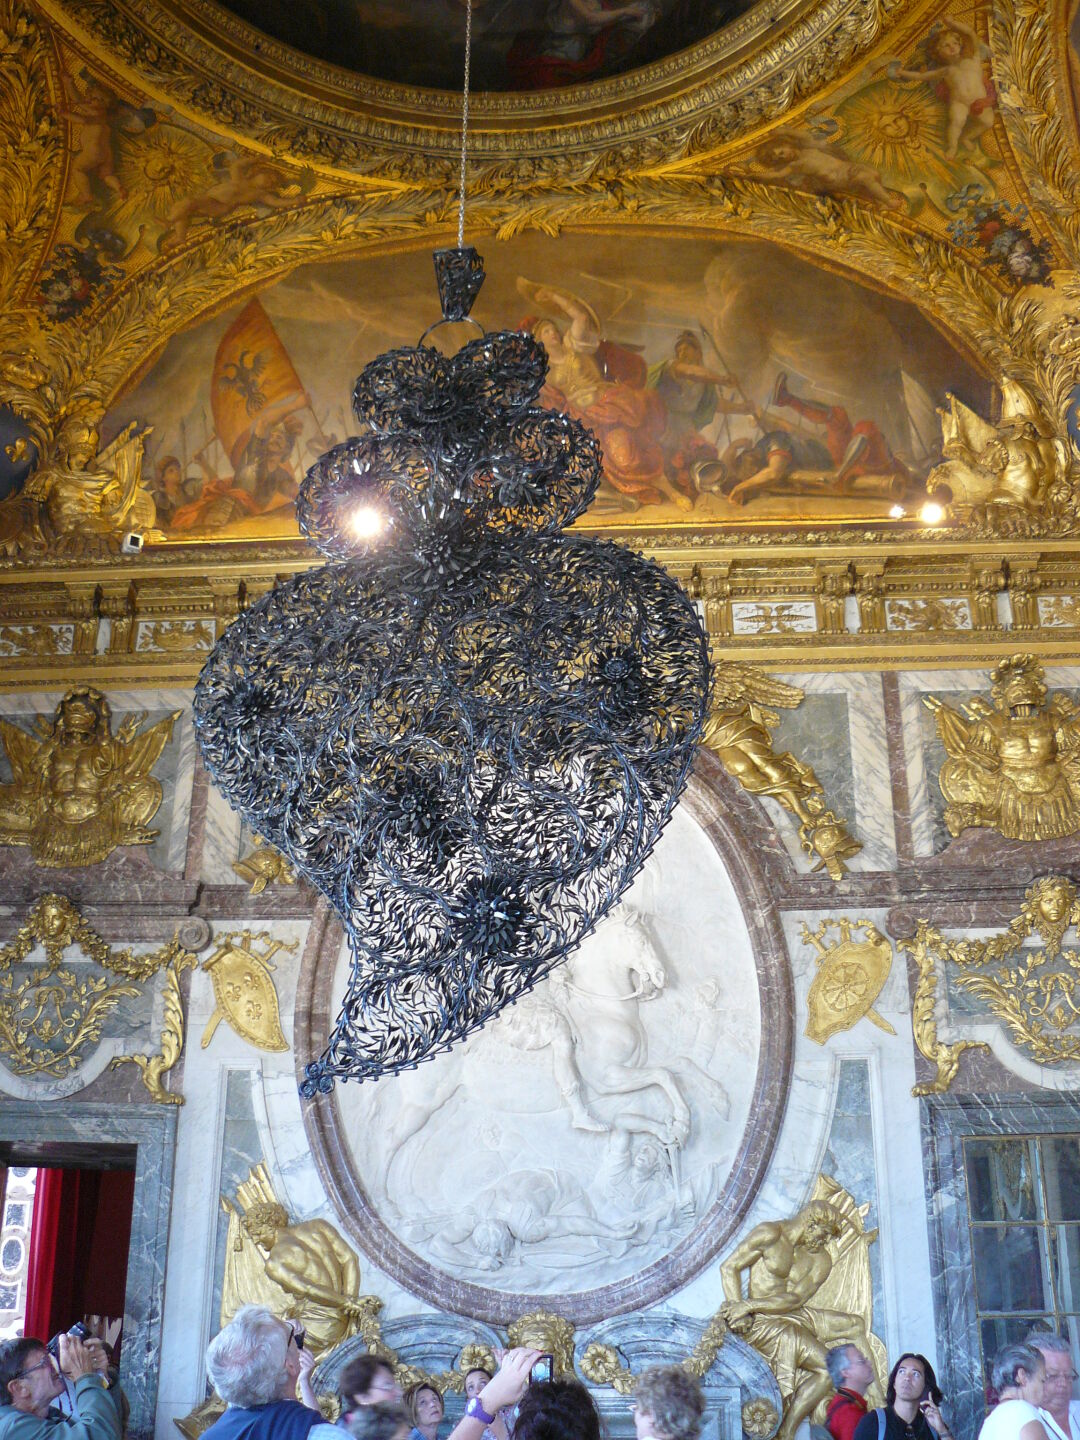 In Versailles, there was an exhibition of portuguese artist Joana Vasconcelos. This item is made from plastic forks and spoons.